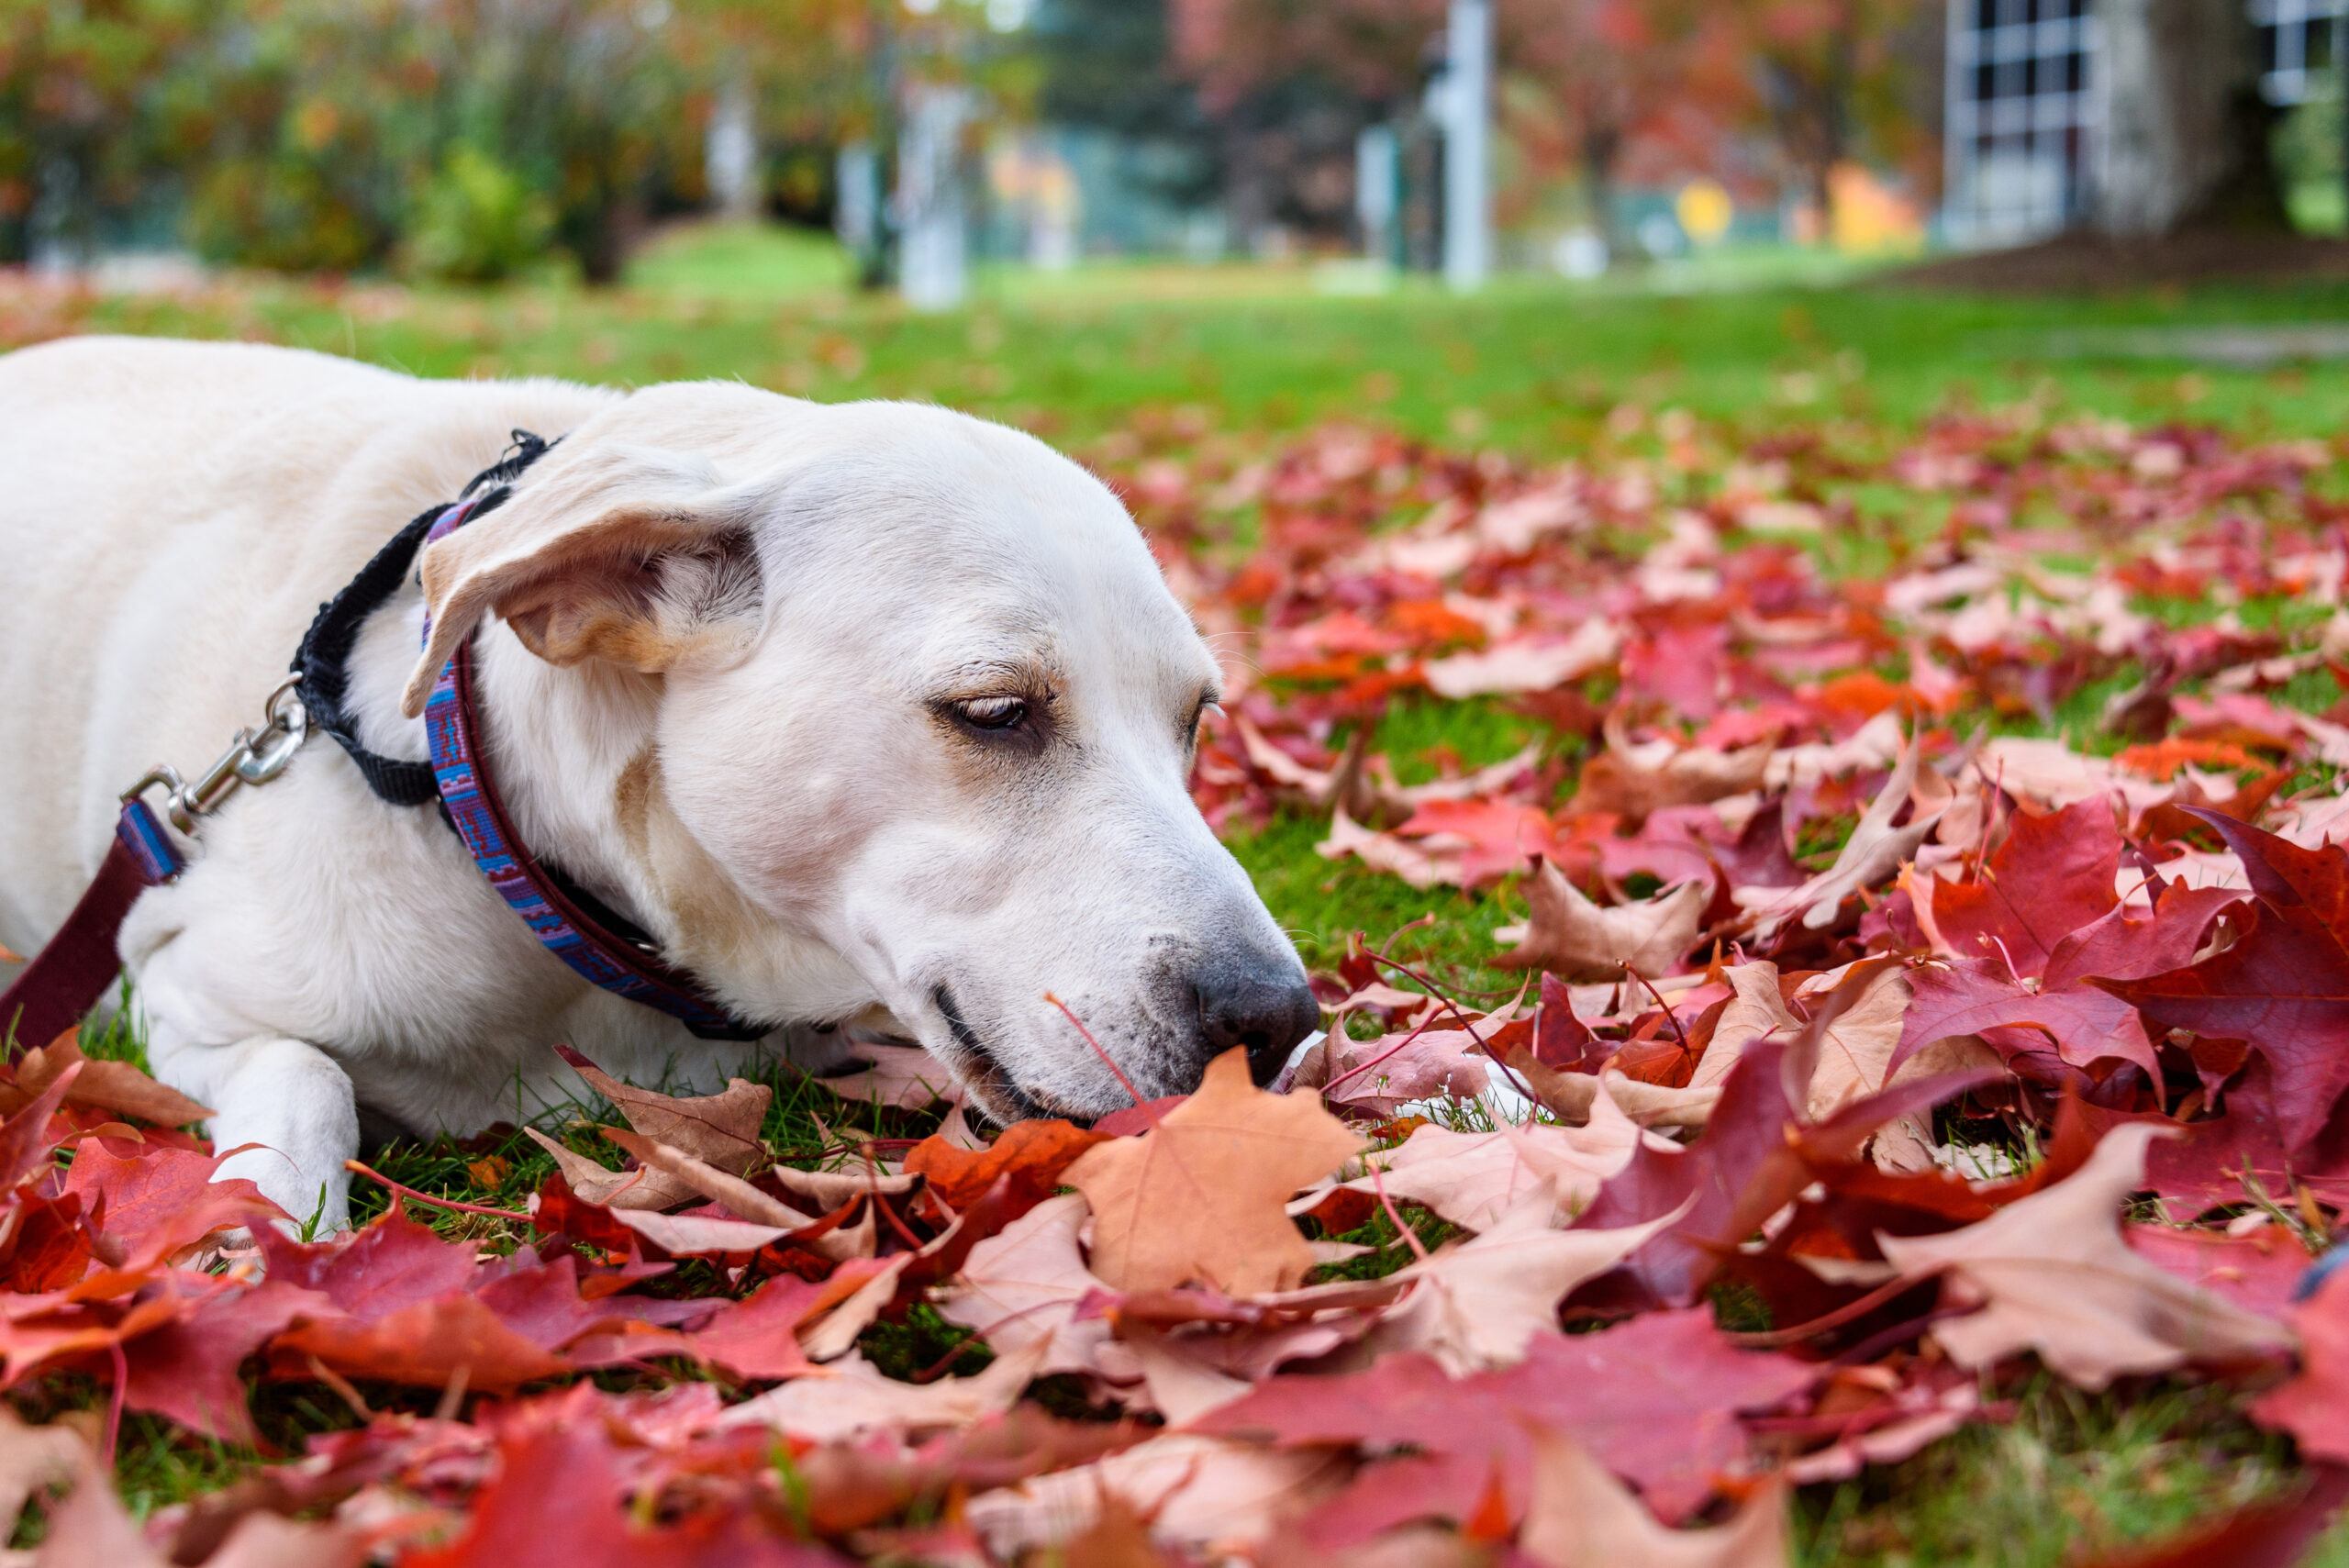 White lab mix rescue dog outside in the park, red maple leaves scattered on the grass, buildings in background